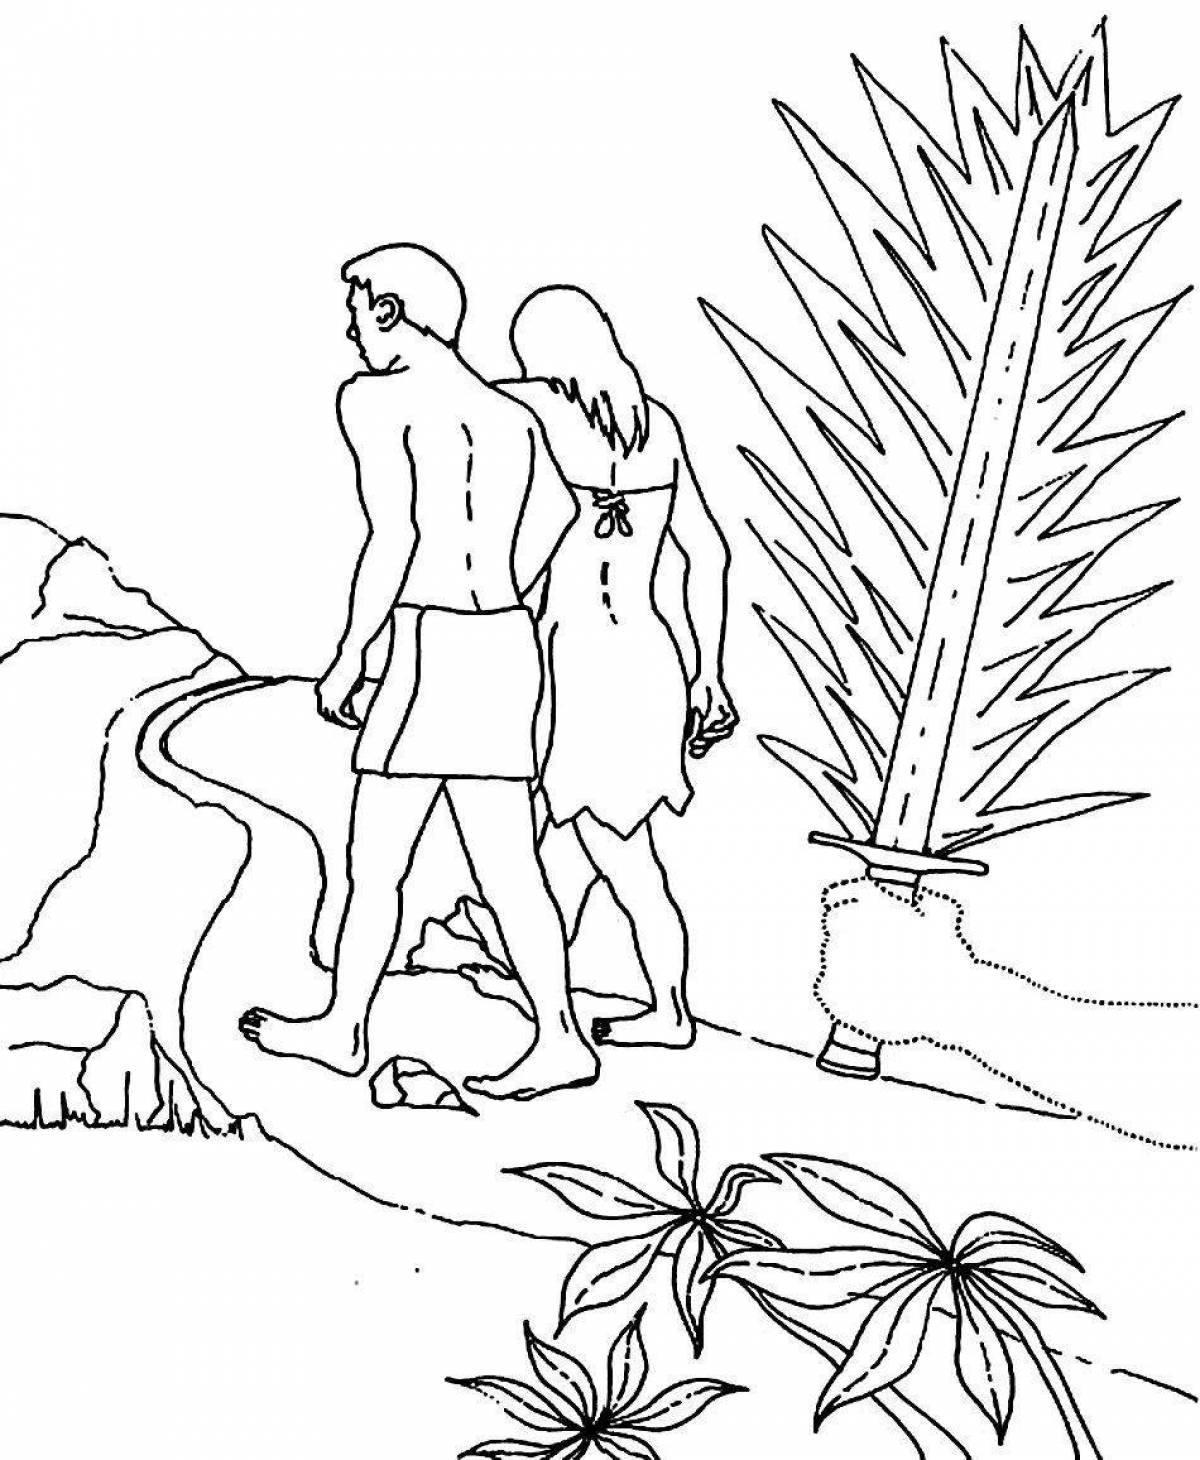 Funny adam and eve coloring